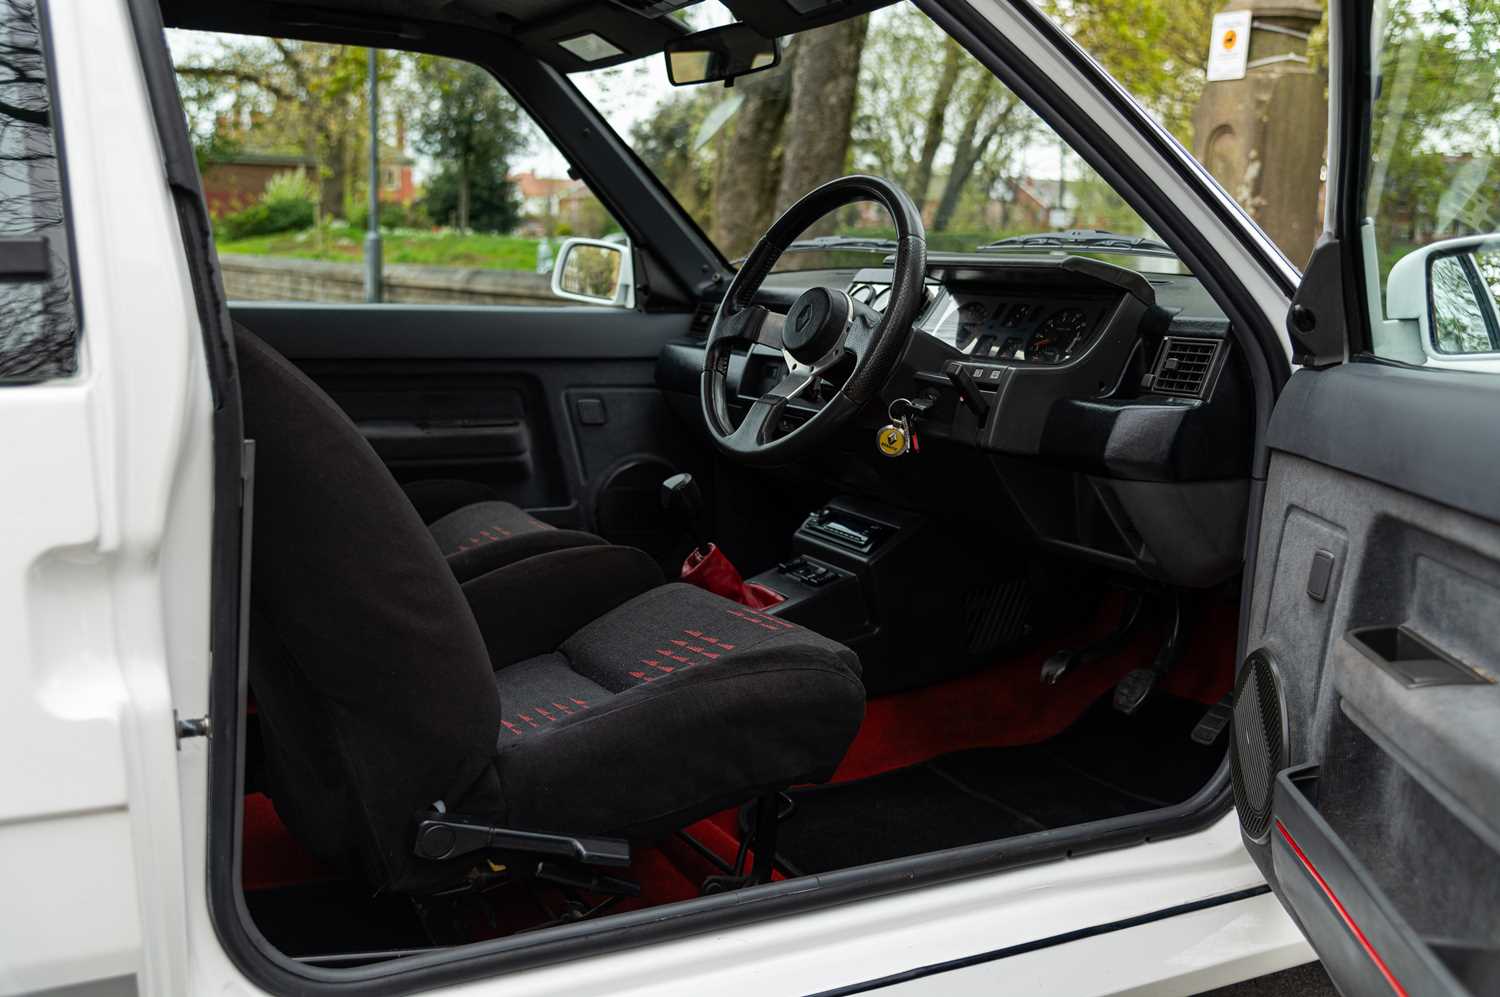 1990 Renault 5 GT Turbo - Image 58 of 79